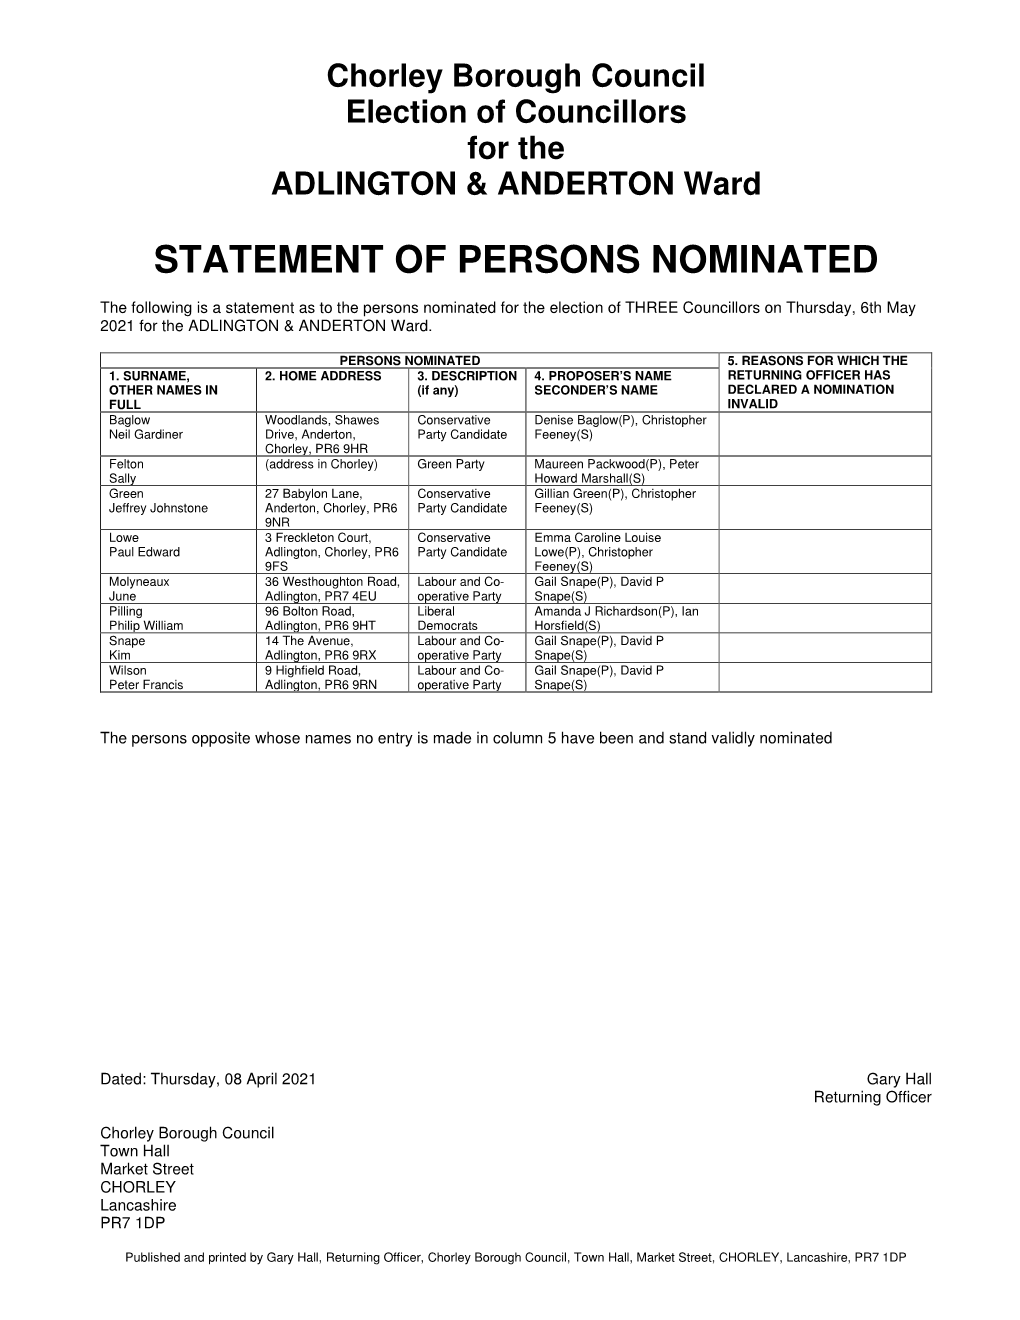 Statement of Persons Nominated